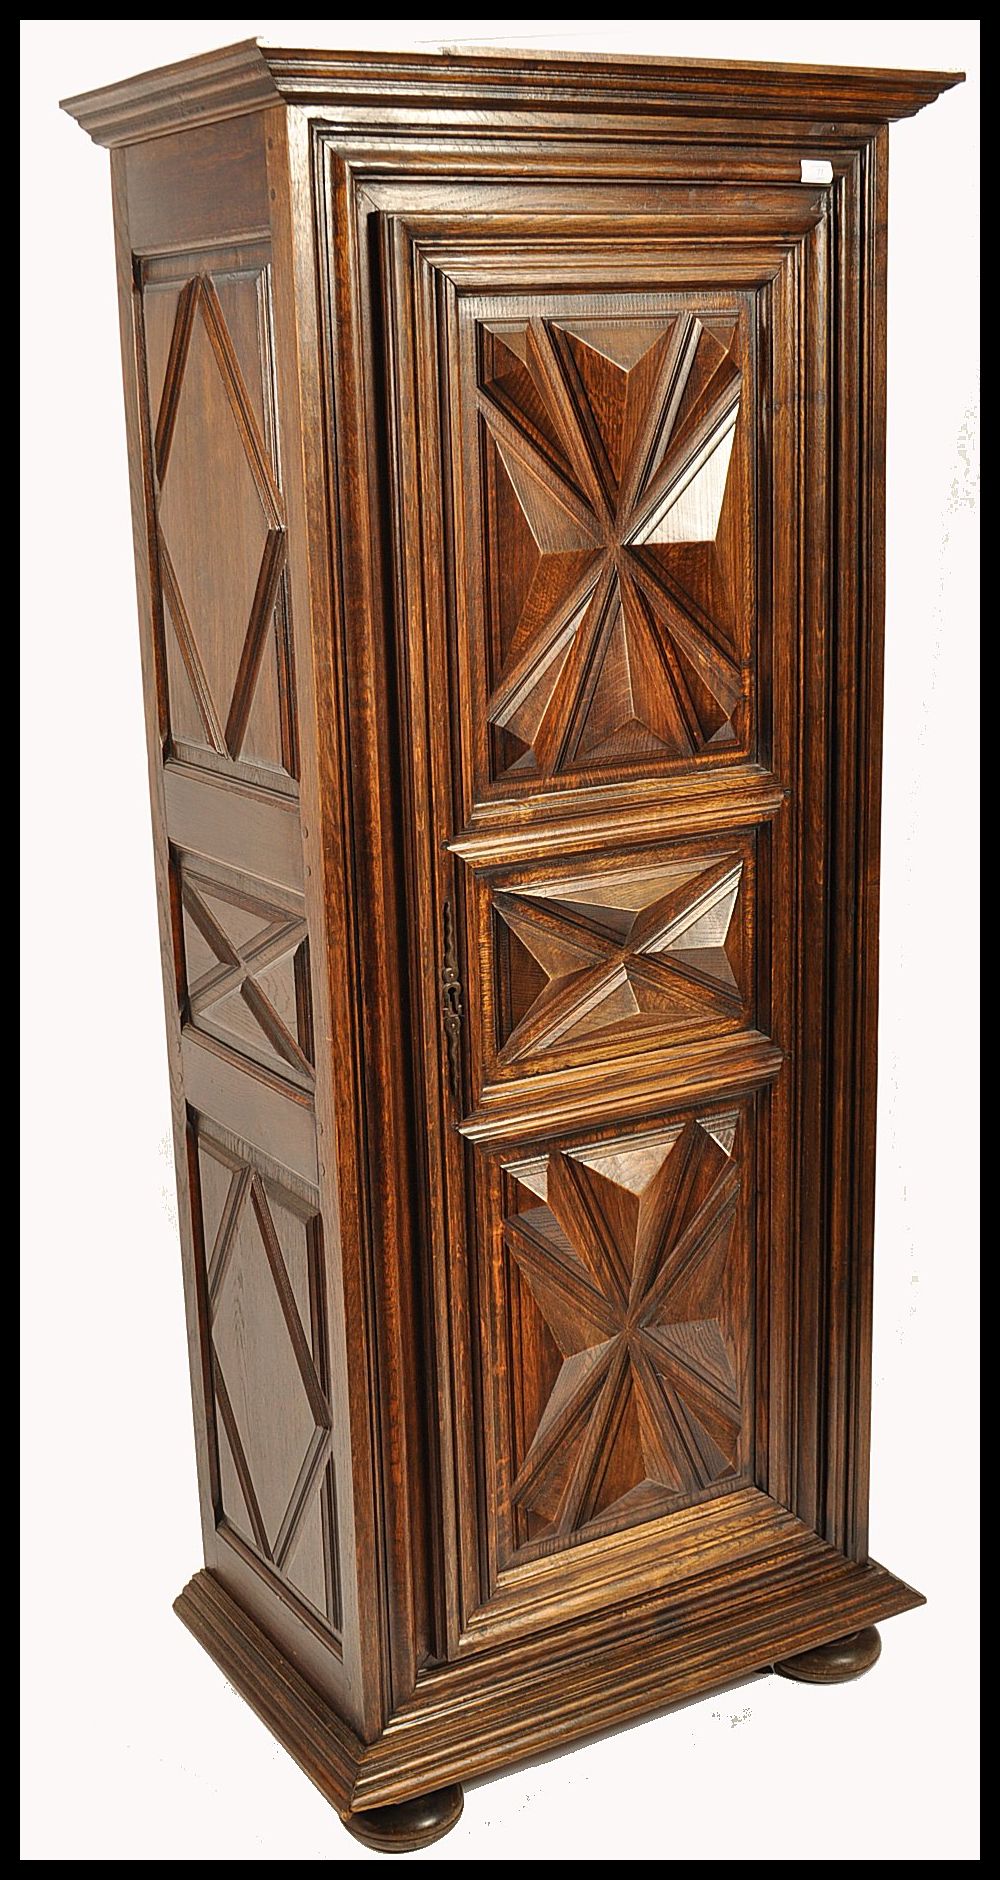 A 19th century country oak French Bonnetiere hall cupboard / armoire linen press. The upright sentry